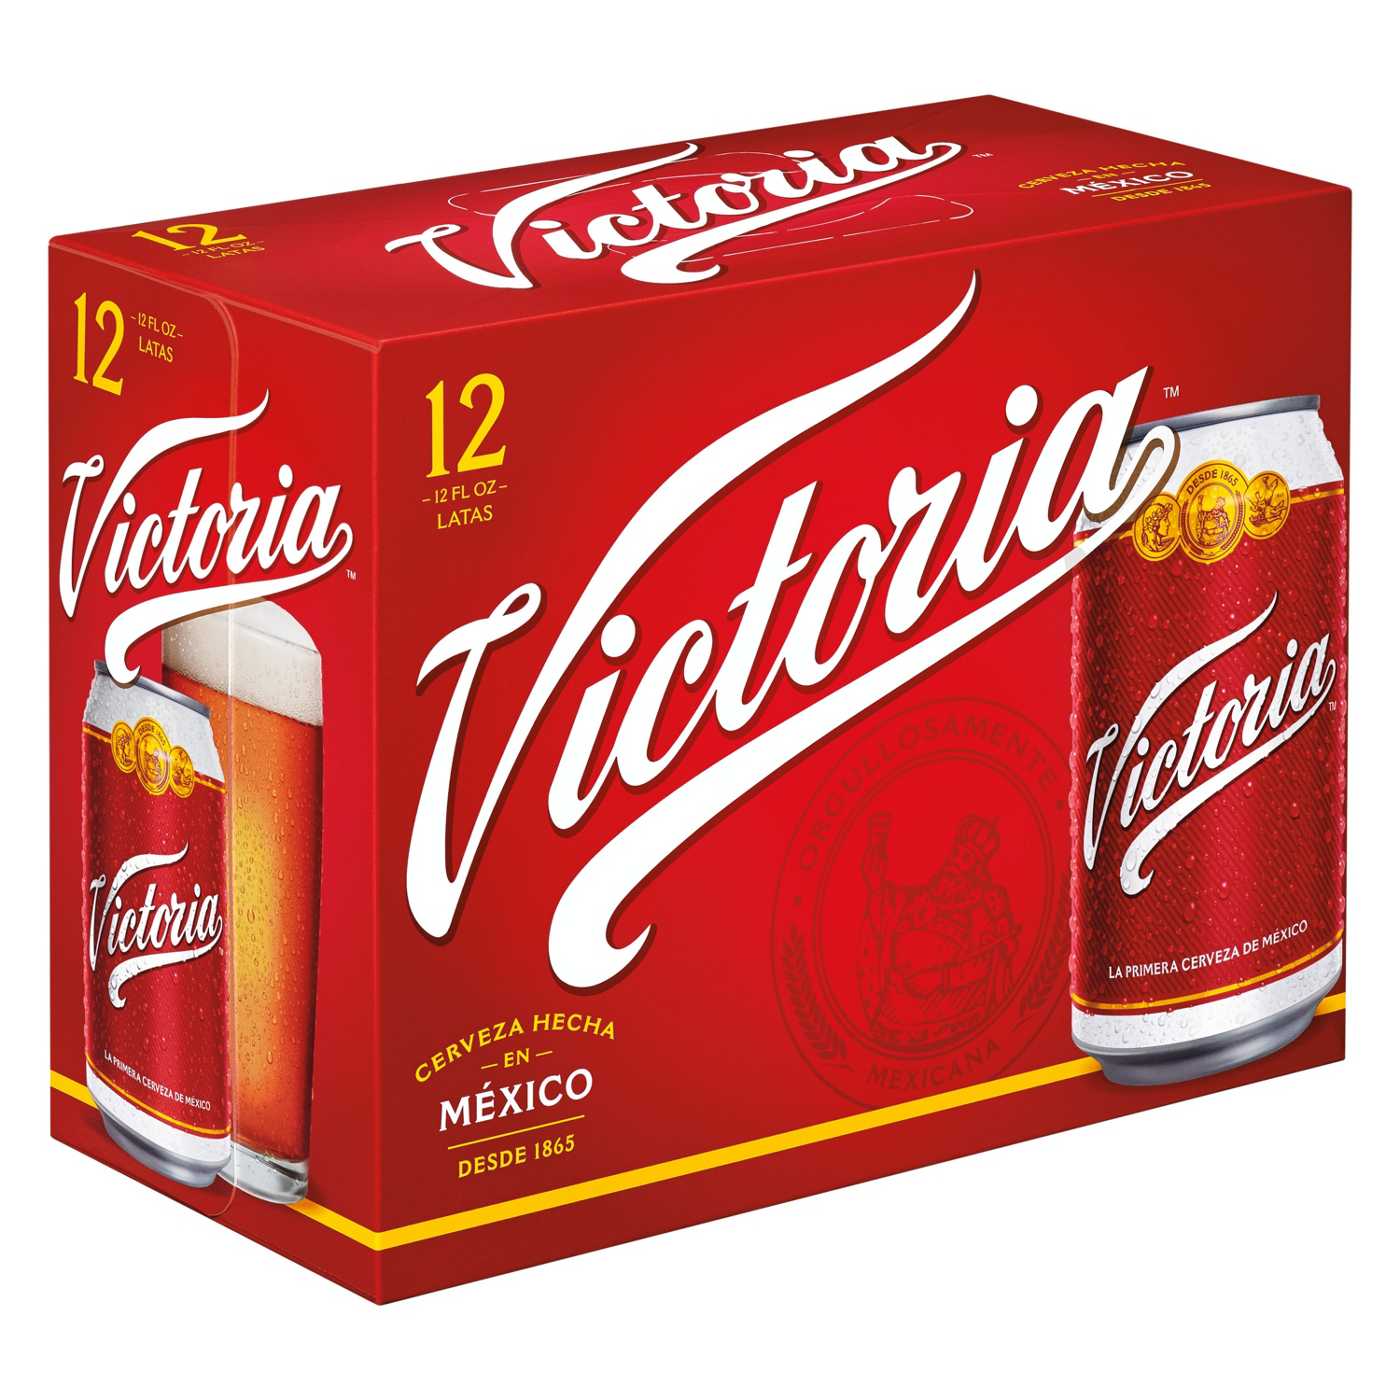 Victoria Amber Lager Mexican Beer 12 oz Cans, 12 pk; image 1 of 8